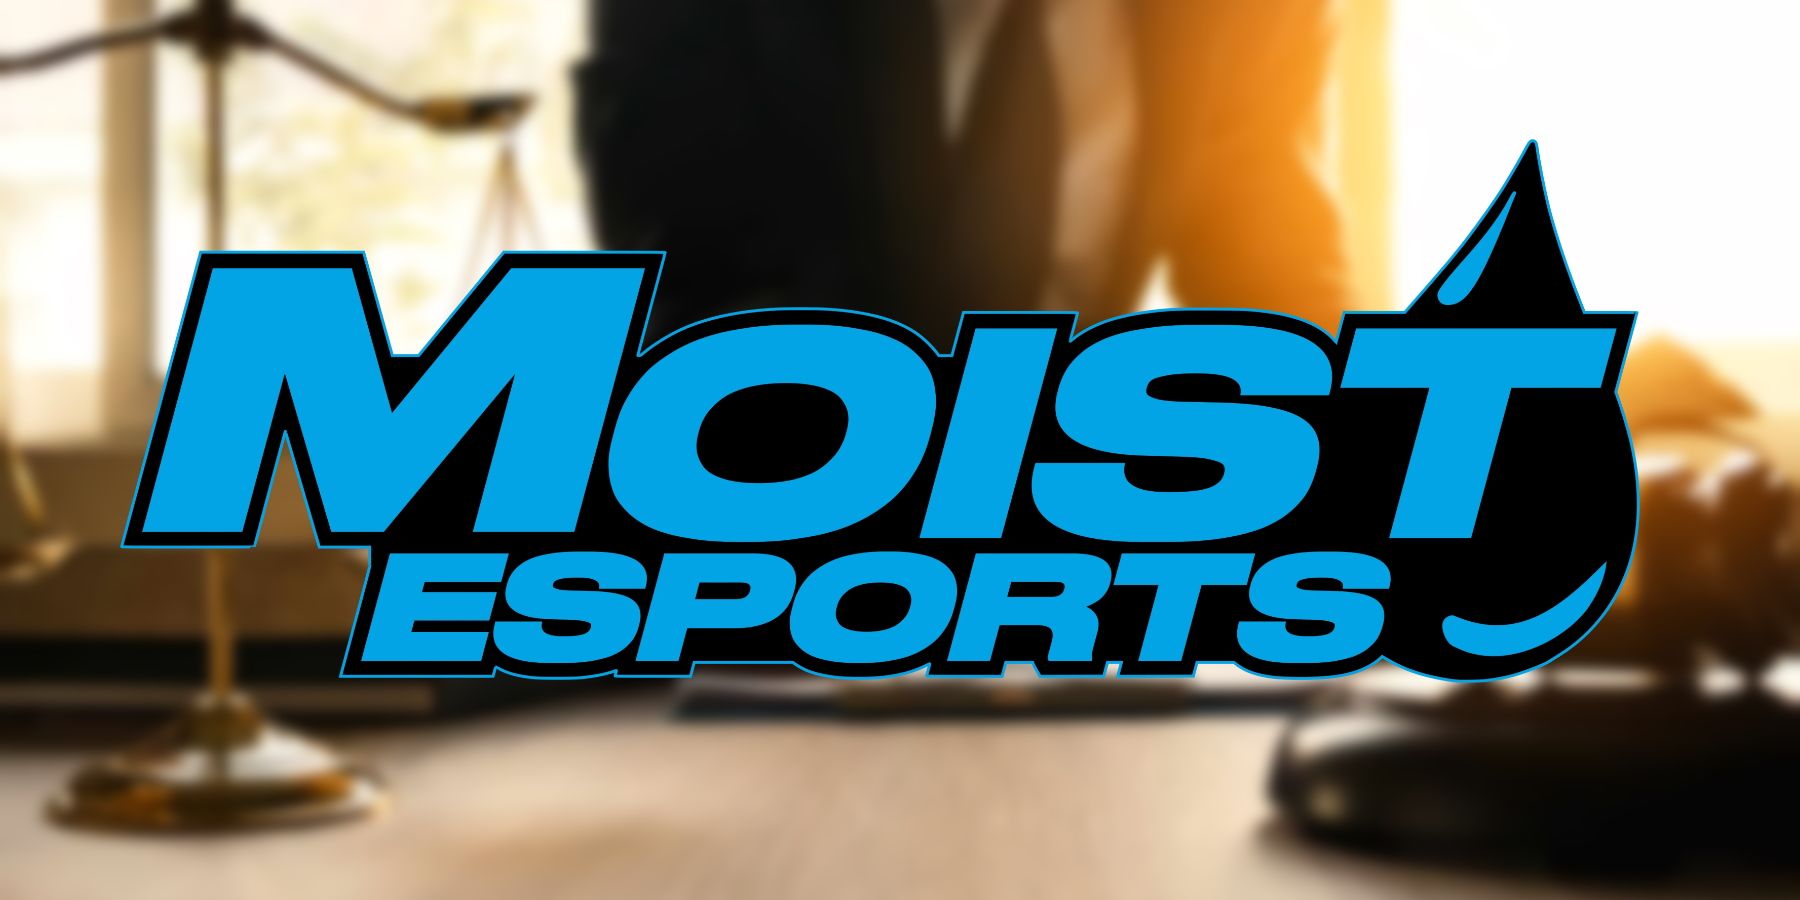 The Moist Esports logo set against a blurred background of a lawyer's desk.